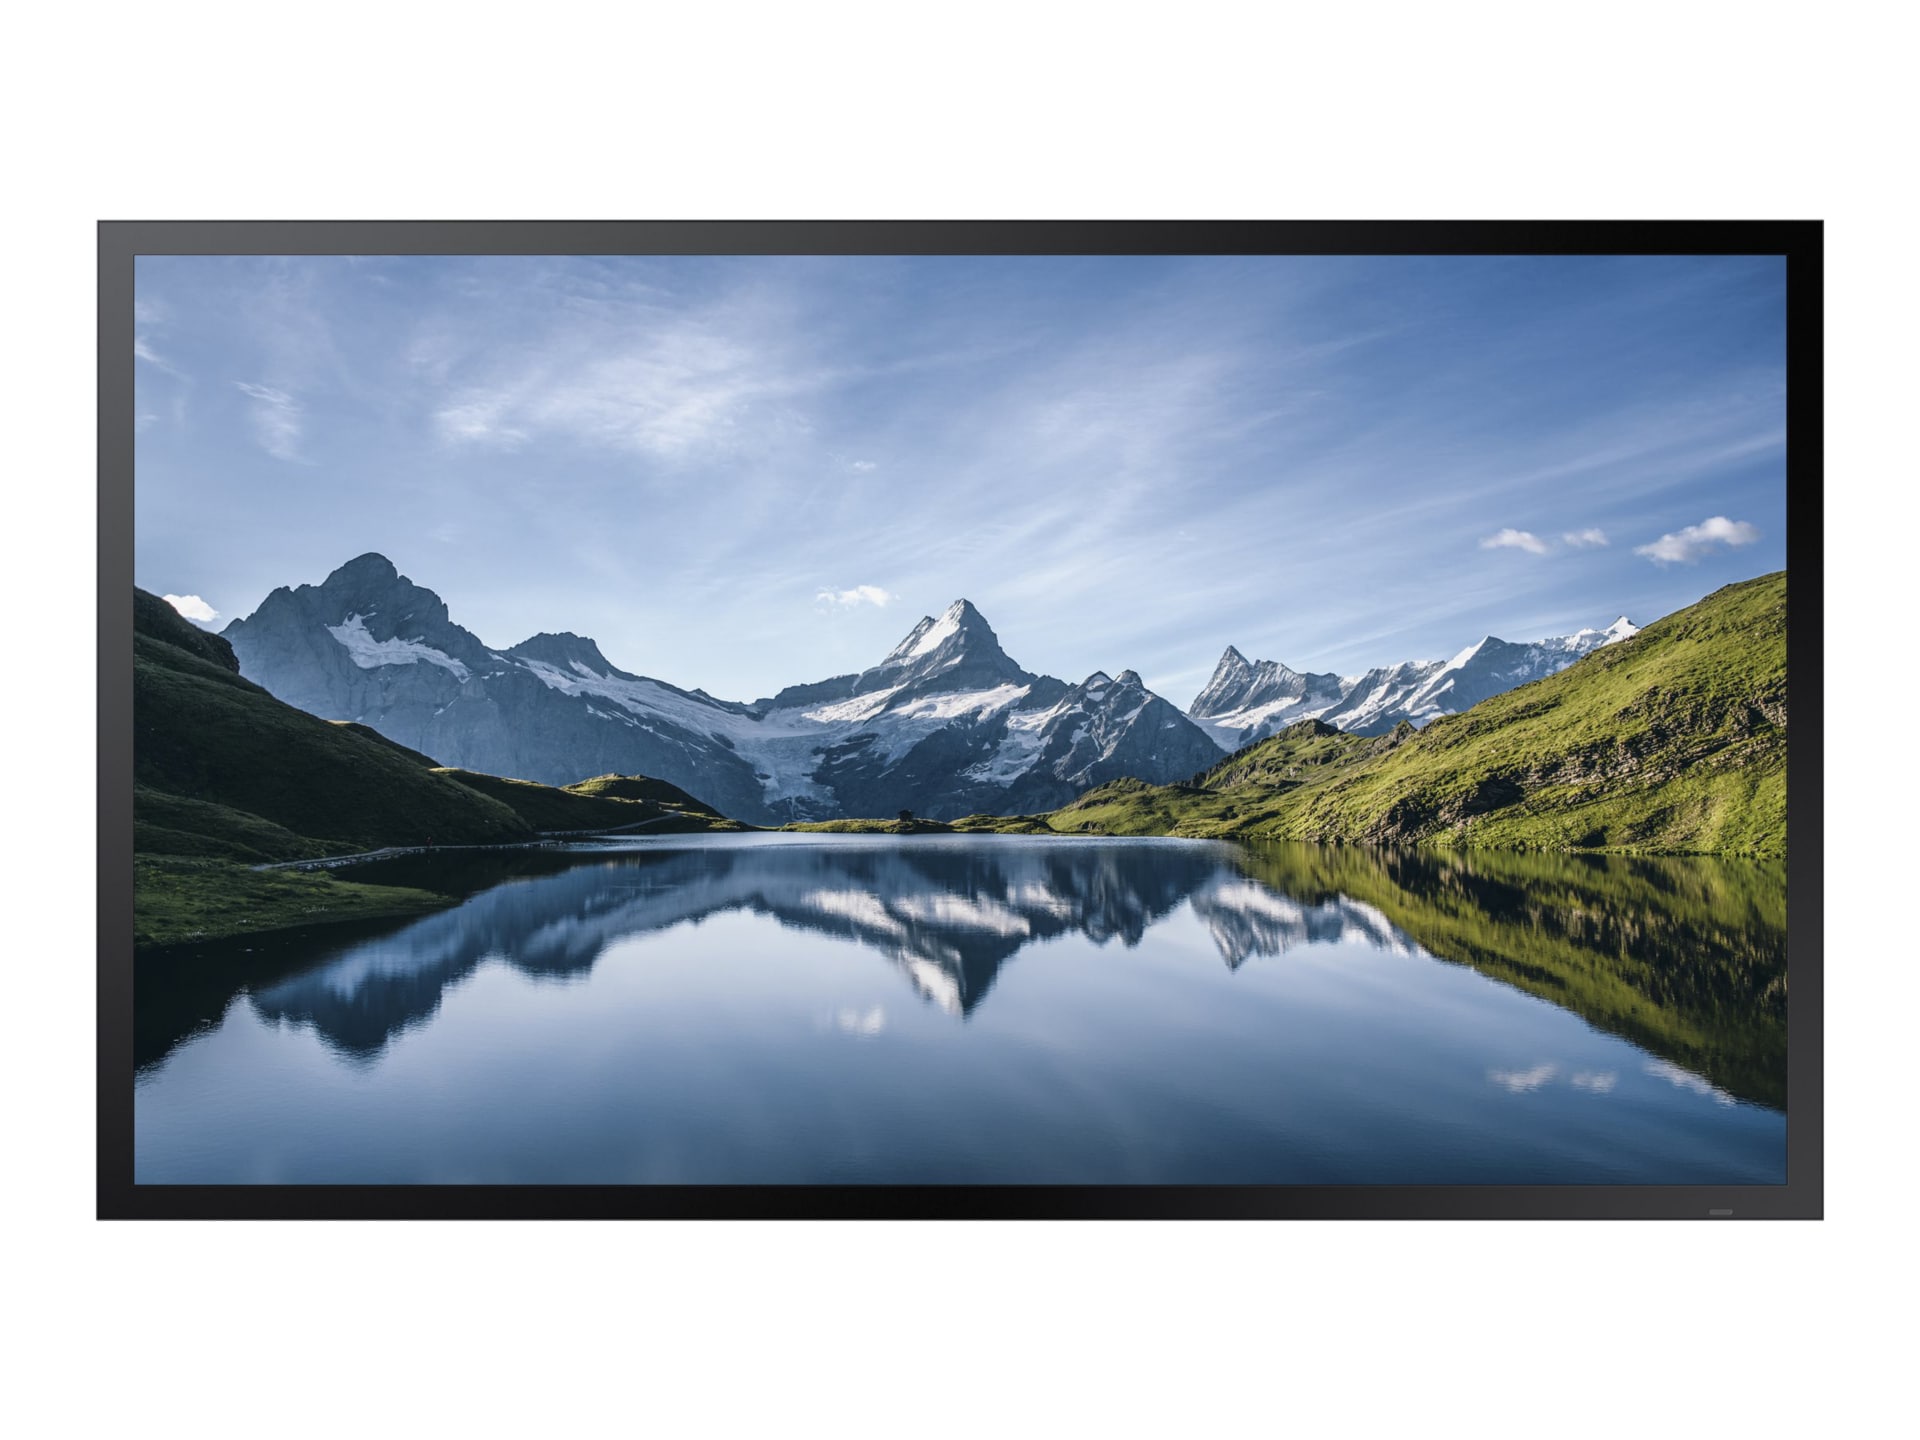 Samsung OH46B-S OHB-S Series - 46" Class (45.9" viewable) LED-backlit LCD display - Full HD - outdoor - for digital